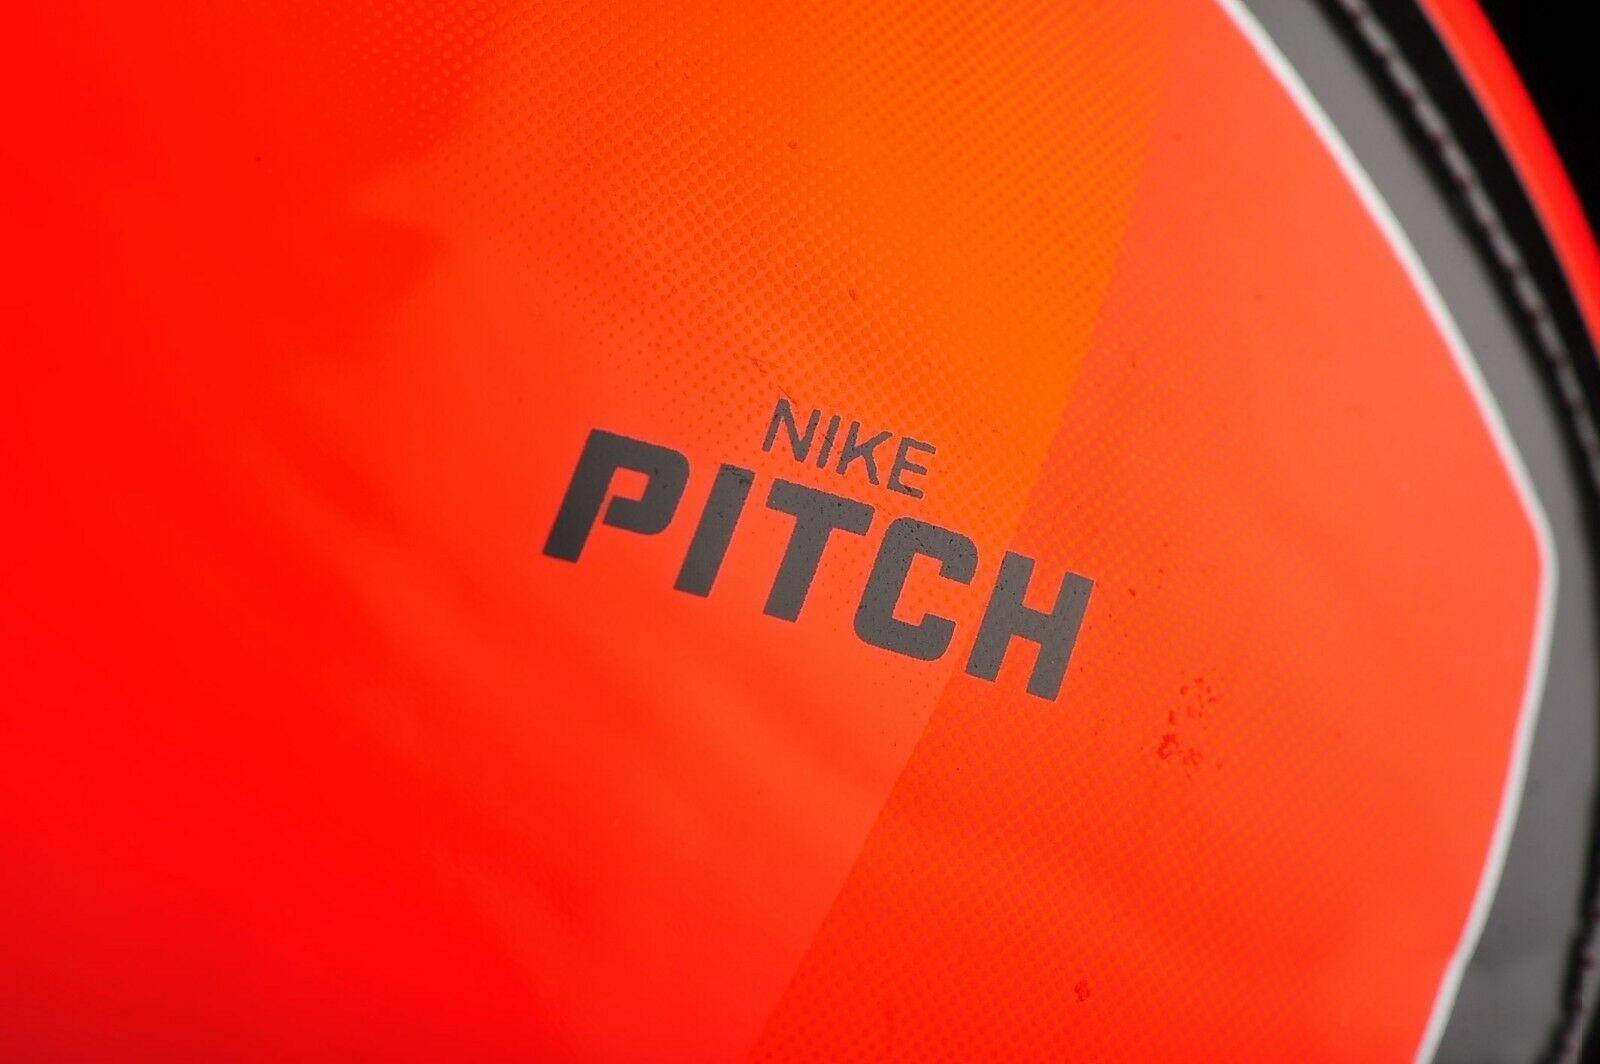 Red Sports Equipment Logo - Nike Pitch Football Ball Soccer Bright University Red White Size 5 ...